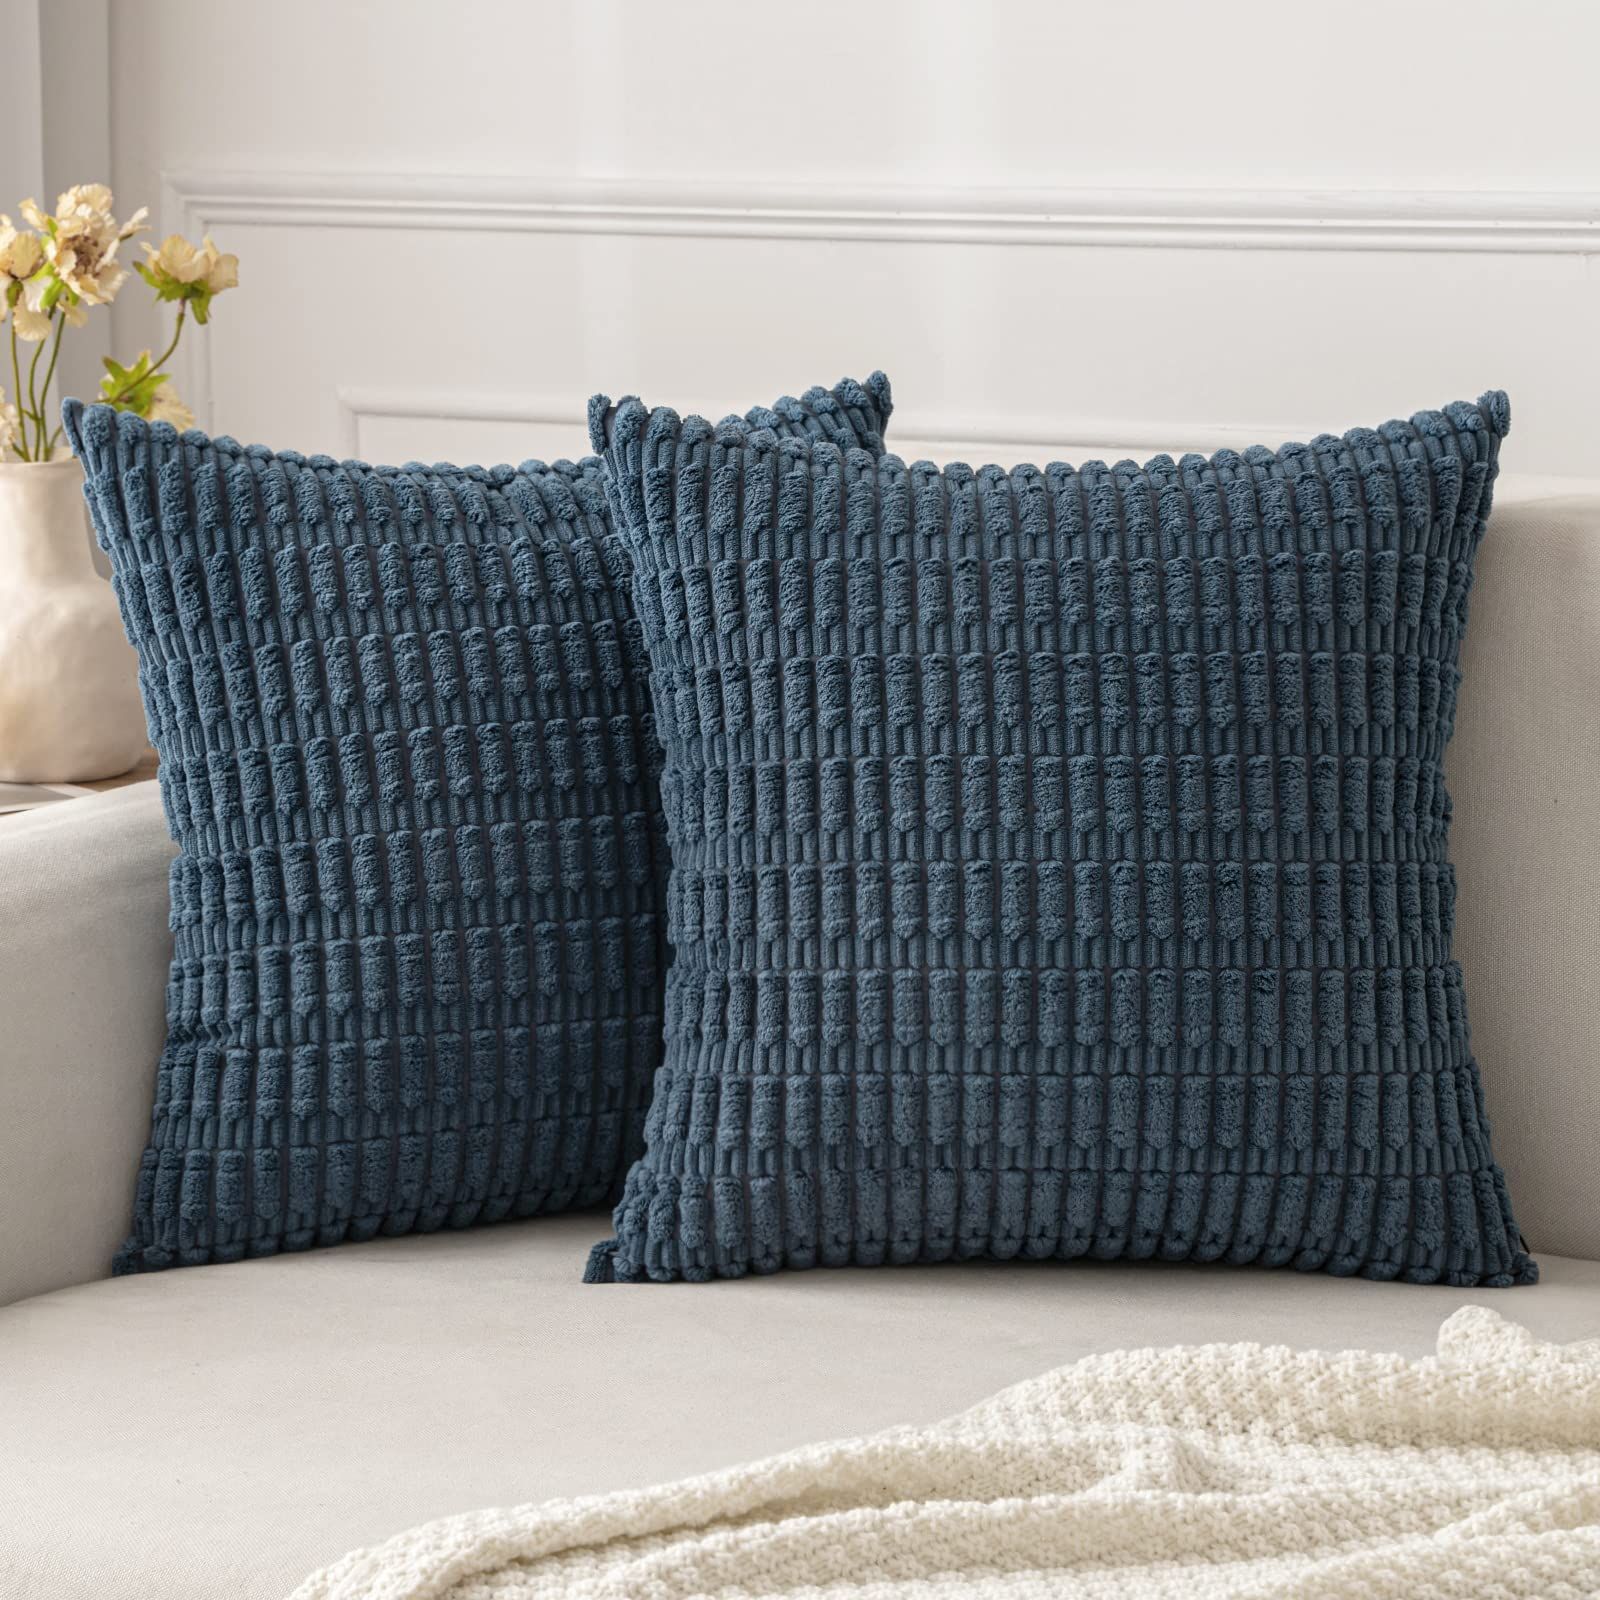 MIULEE Pack of 2 Corduroy Decorative Throw Pillow Covers 18x18 Inch Soft Boho Striped Pillow Covers Modern Farmhouse Home Decor for Sofa Living Room Couch Bed Blue | Amazon (US)